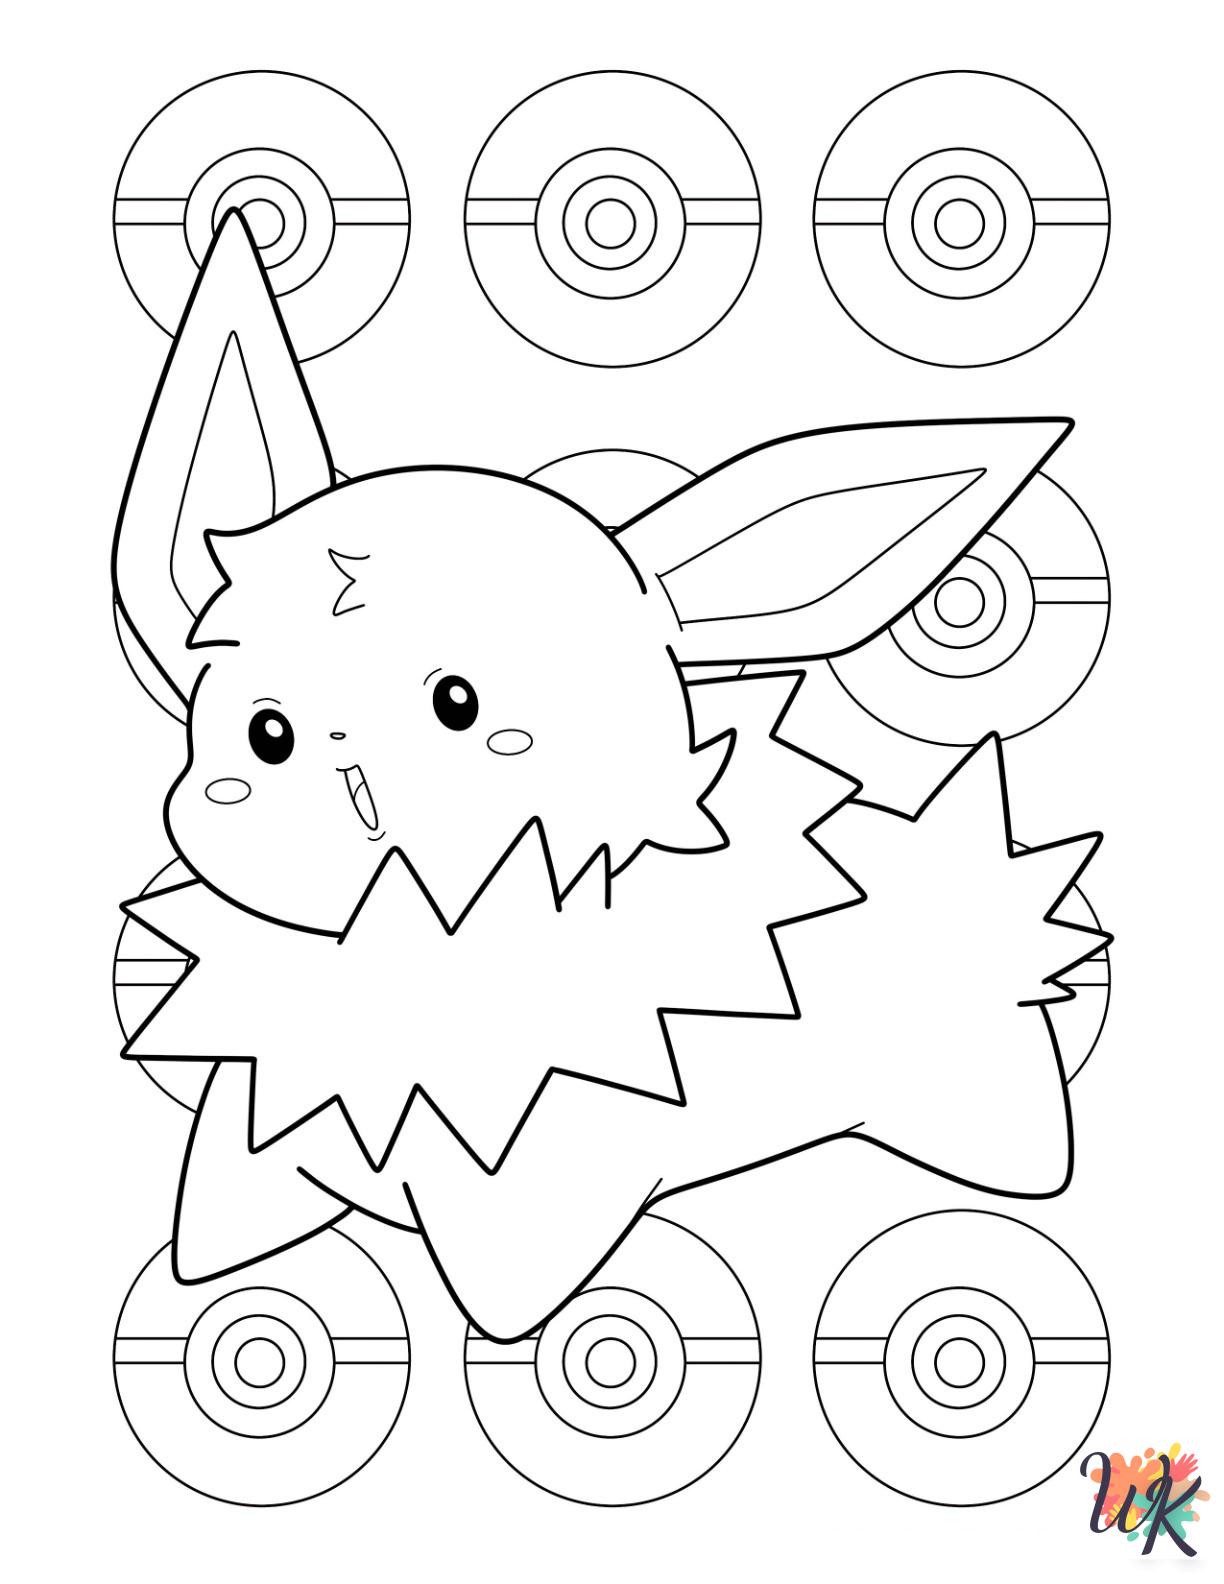 Jolteon coloring pages free printable